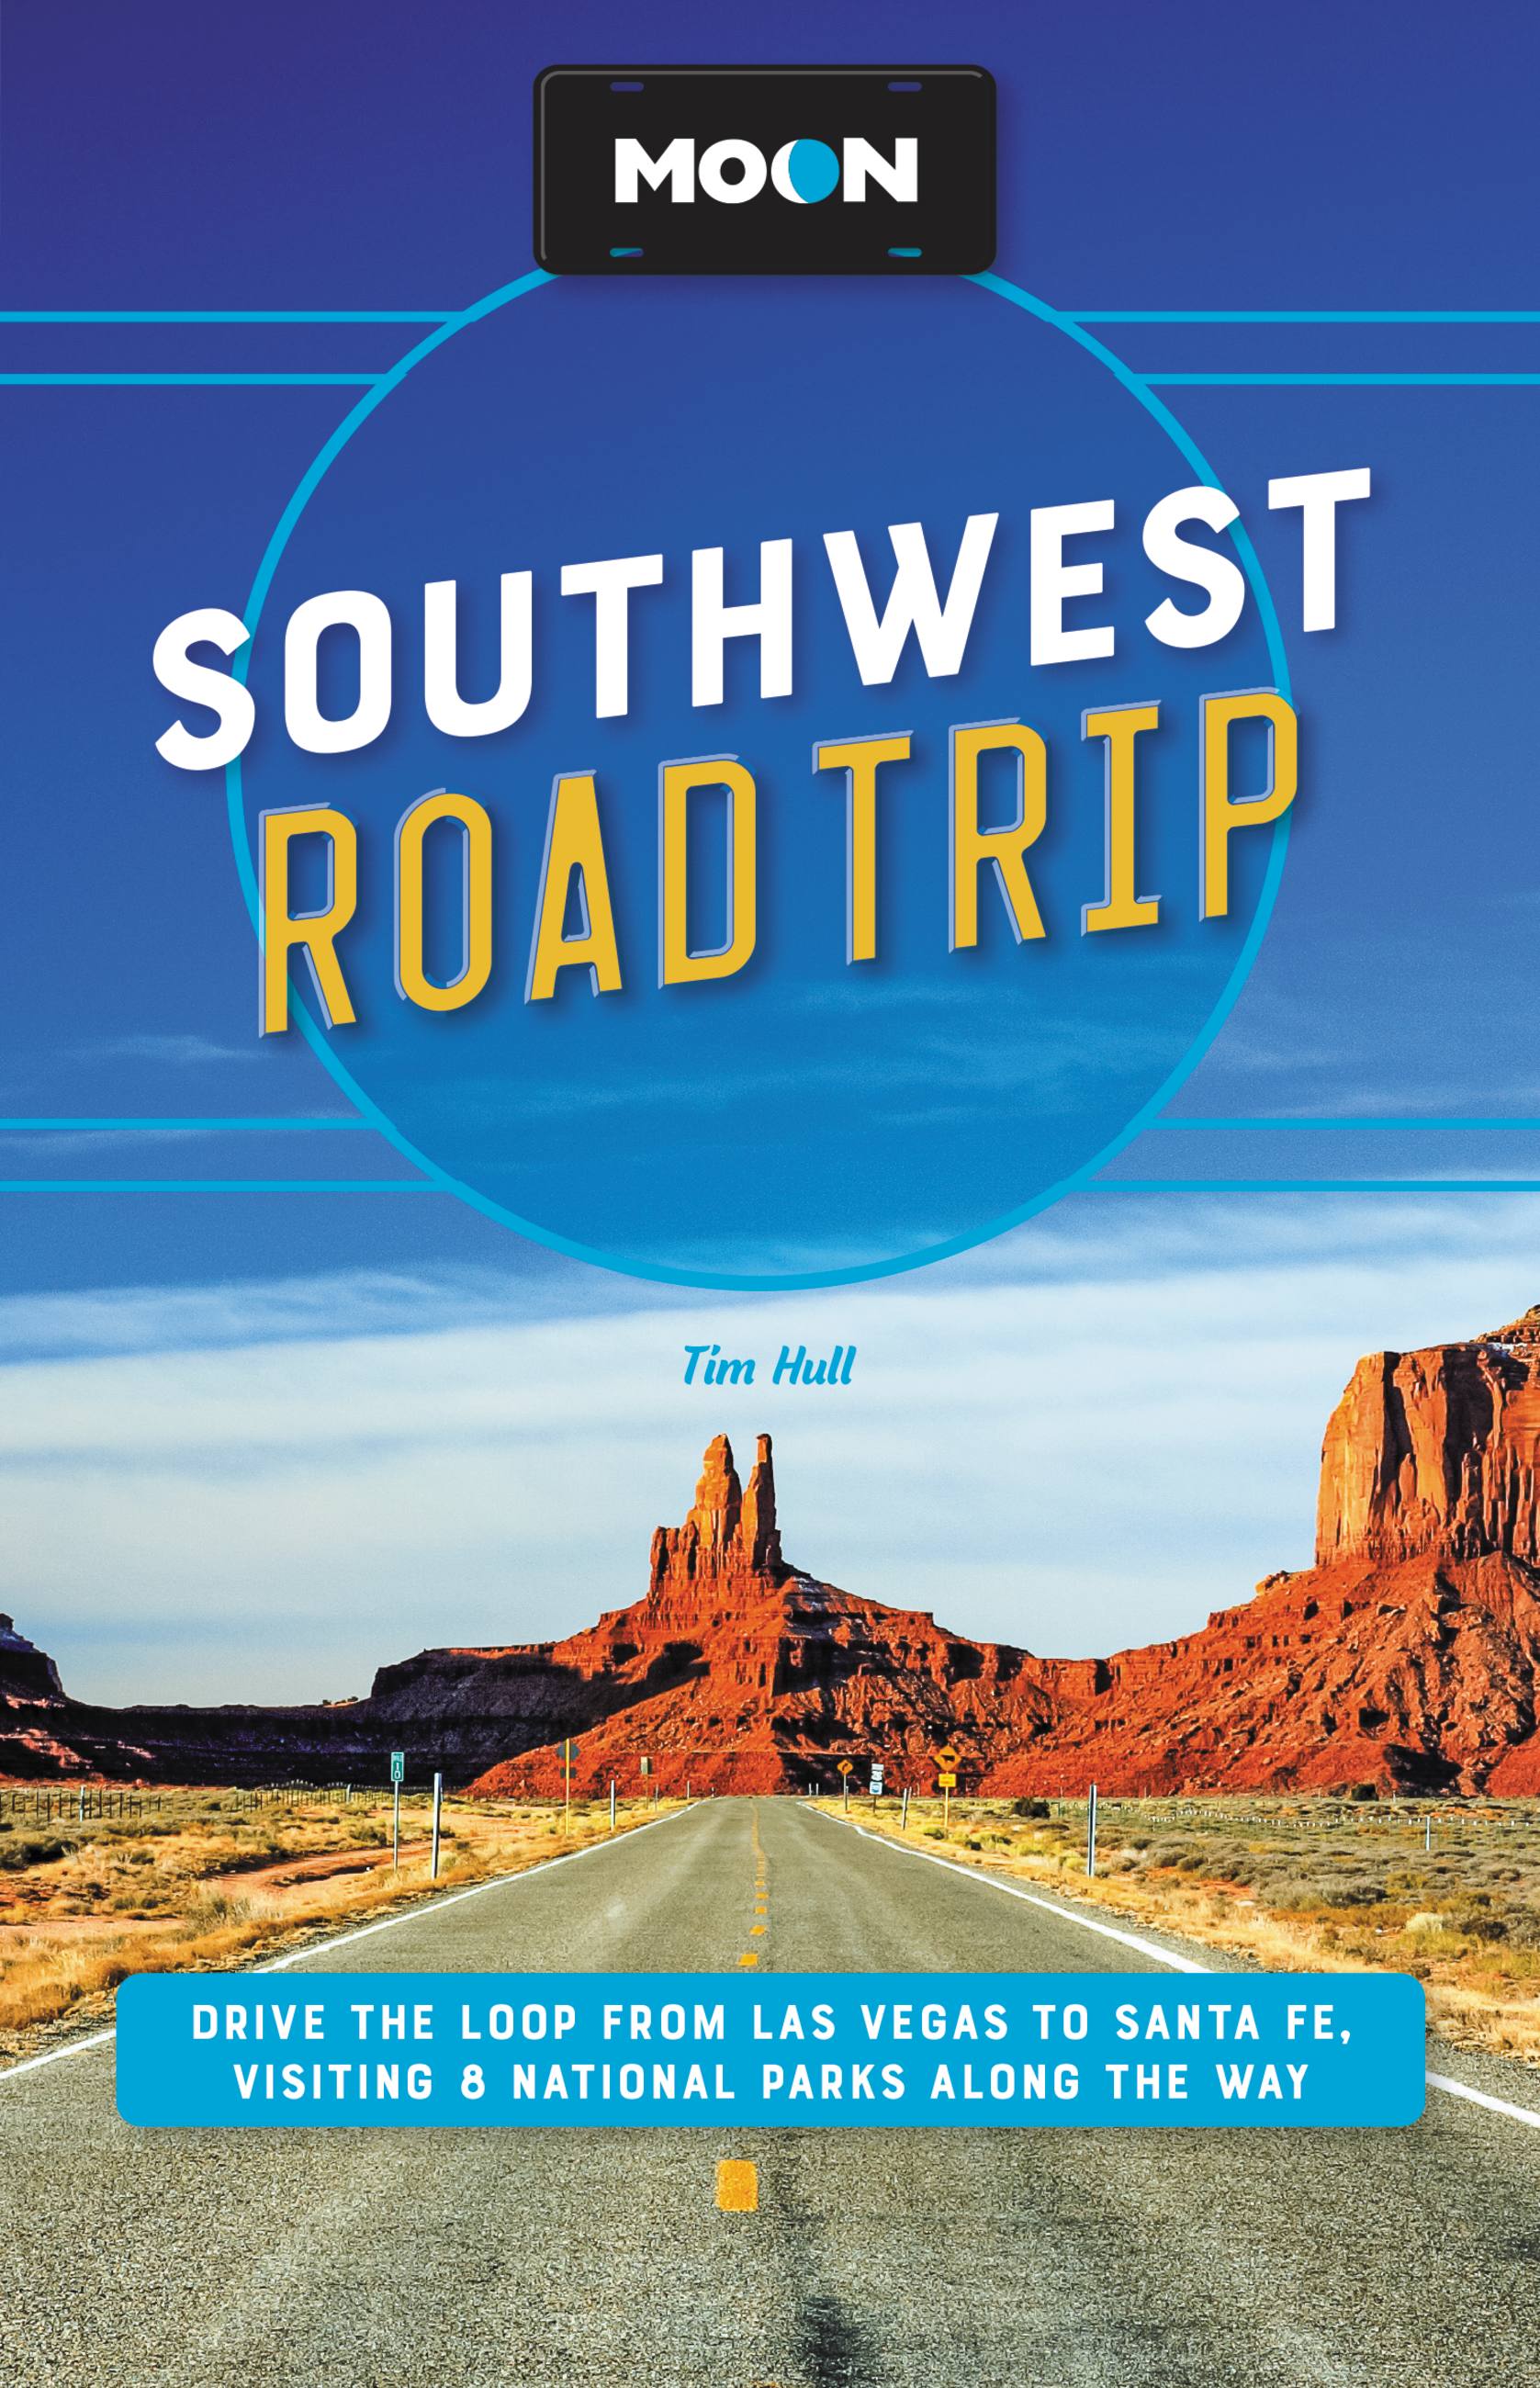 Moon Southwest Road Trip by Hull | Travel Guides